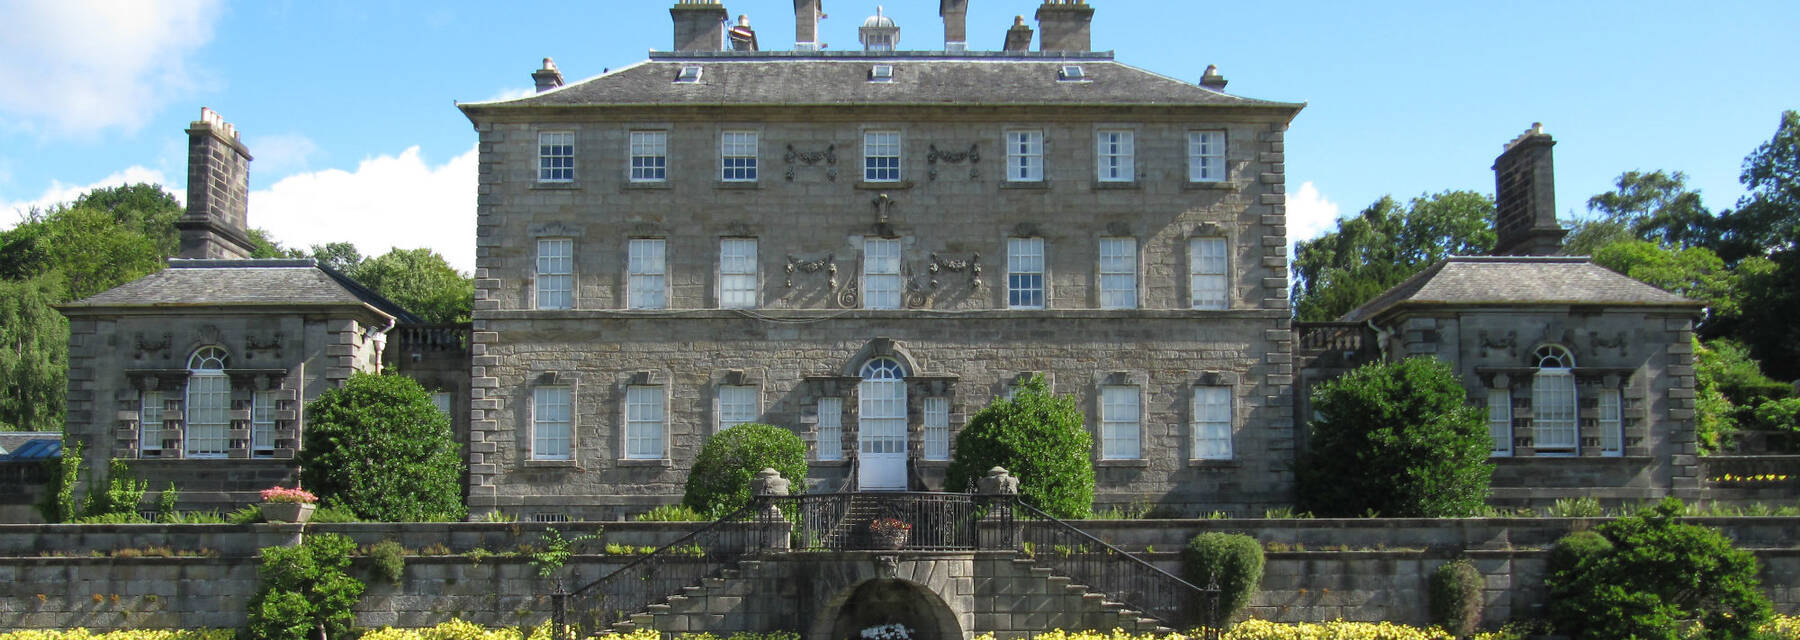 A view of a large, symmetrical Georgian country house. Built in a grey stone, it has a smaller square building each side. Terraced gardens drop down to a lawn in front, with flower beds filled with bright yellow plants.